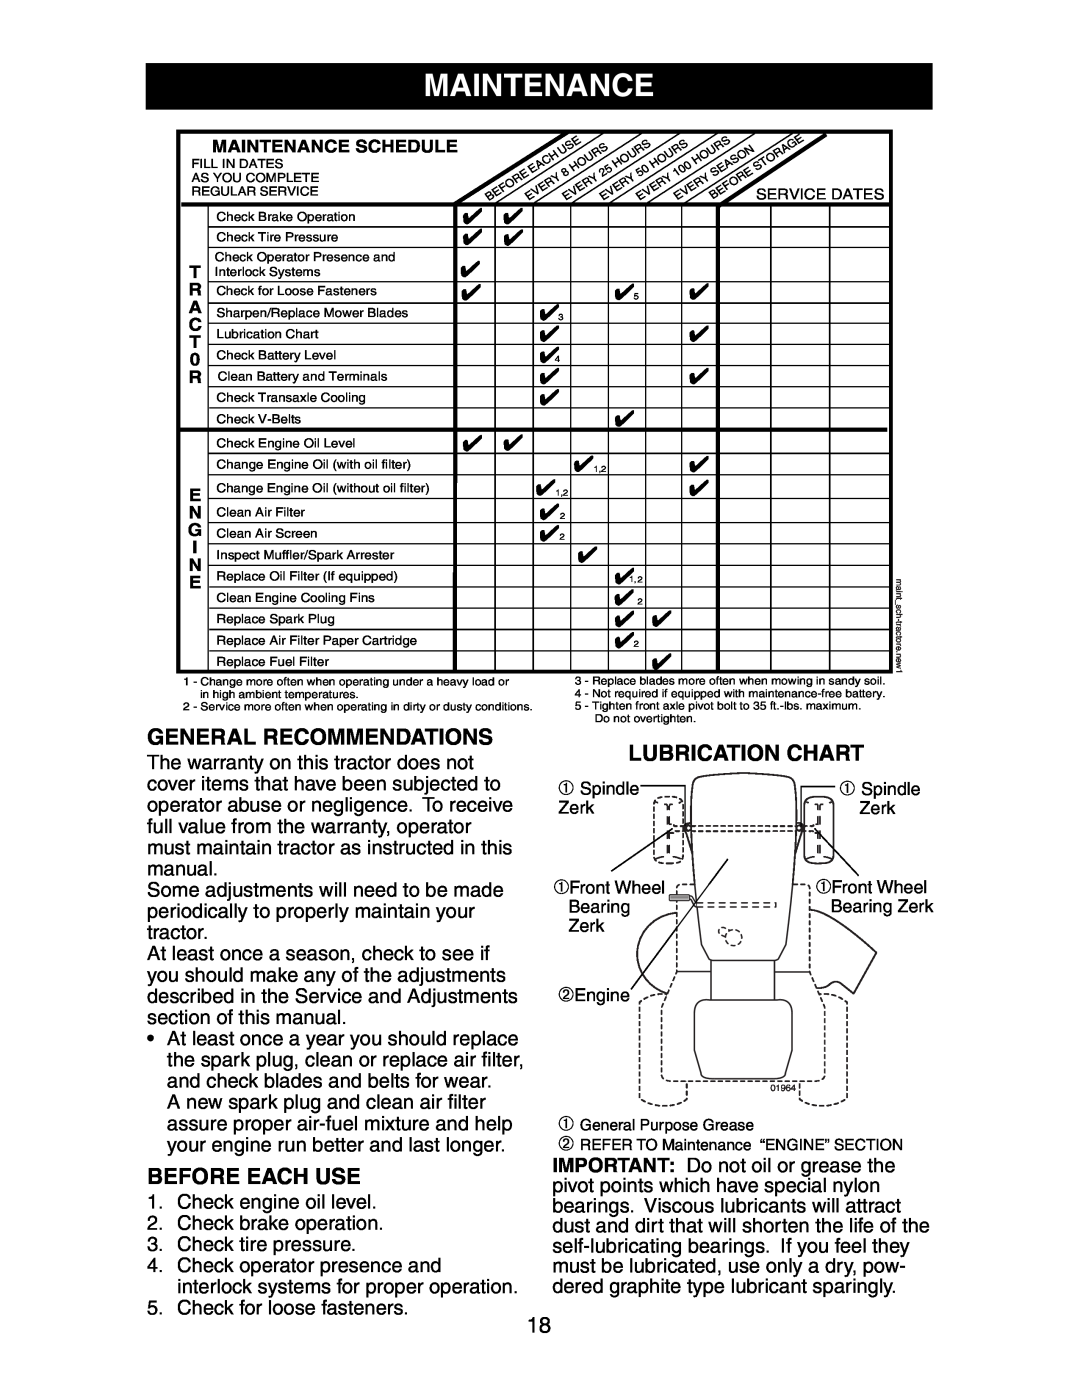 Poulan 191663 manual Maintenance, General Recommendations, Lubrication Chart, Before Each Use 